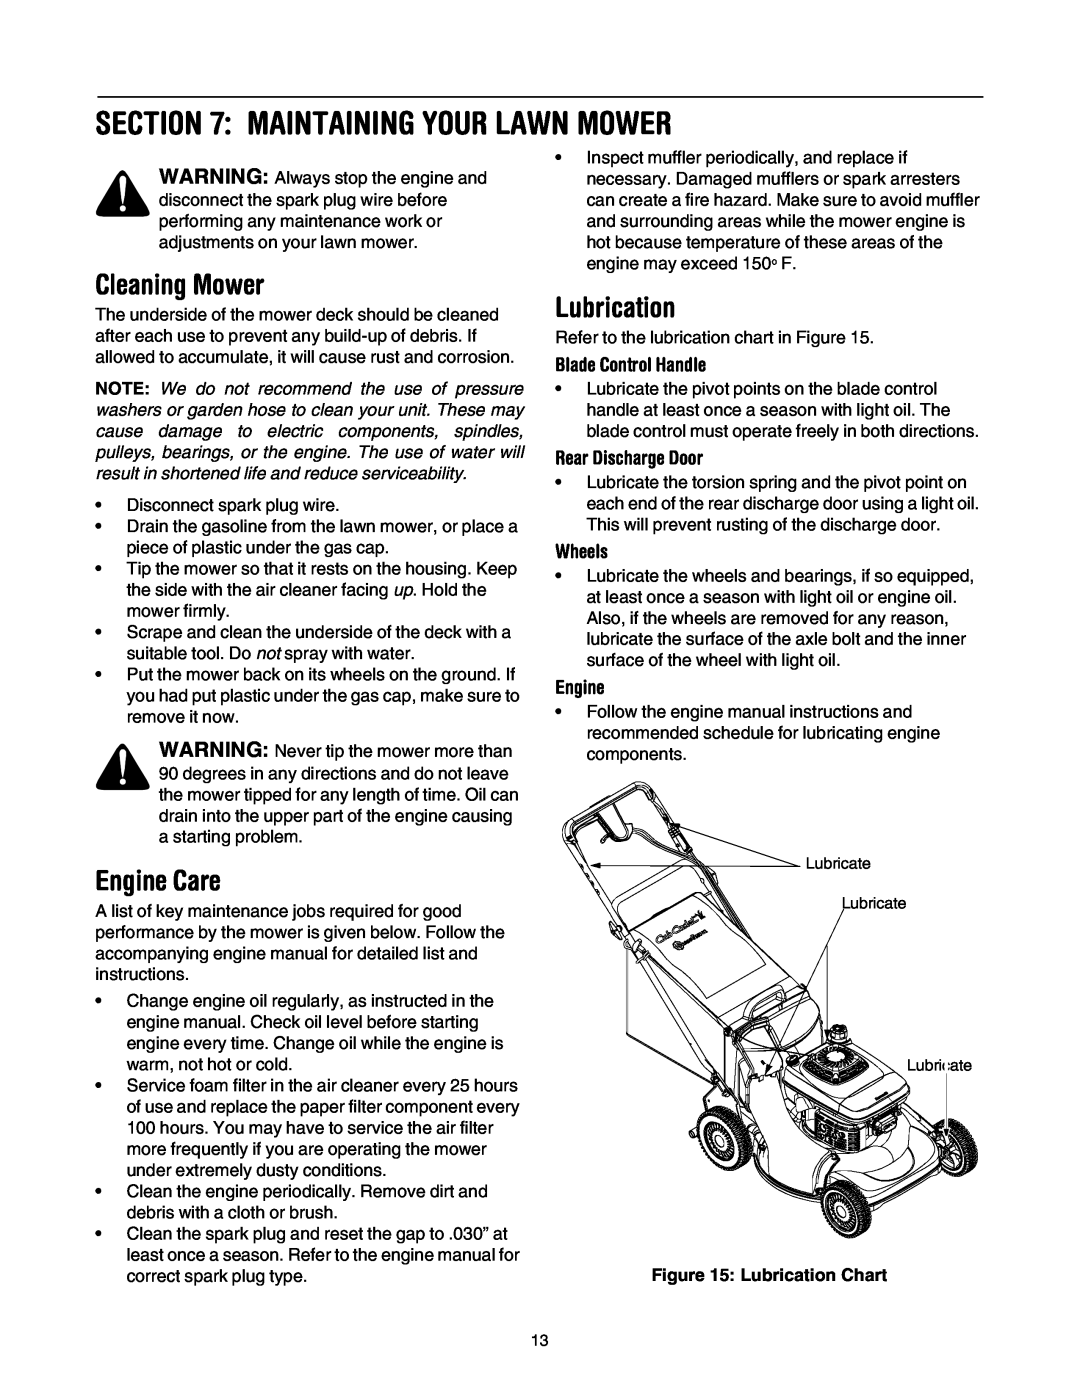 Cub Cadet E977C, 977A Maintaining Your Lawn Mower, Cleaning Mower, Engine Care, Lubrication, Rear Discharge Door, Wheels 